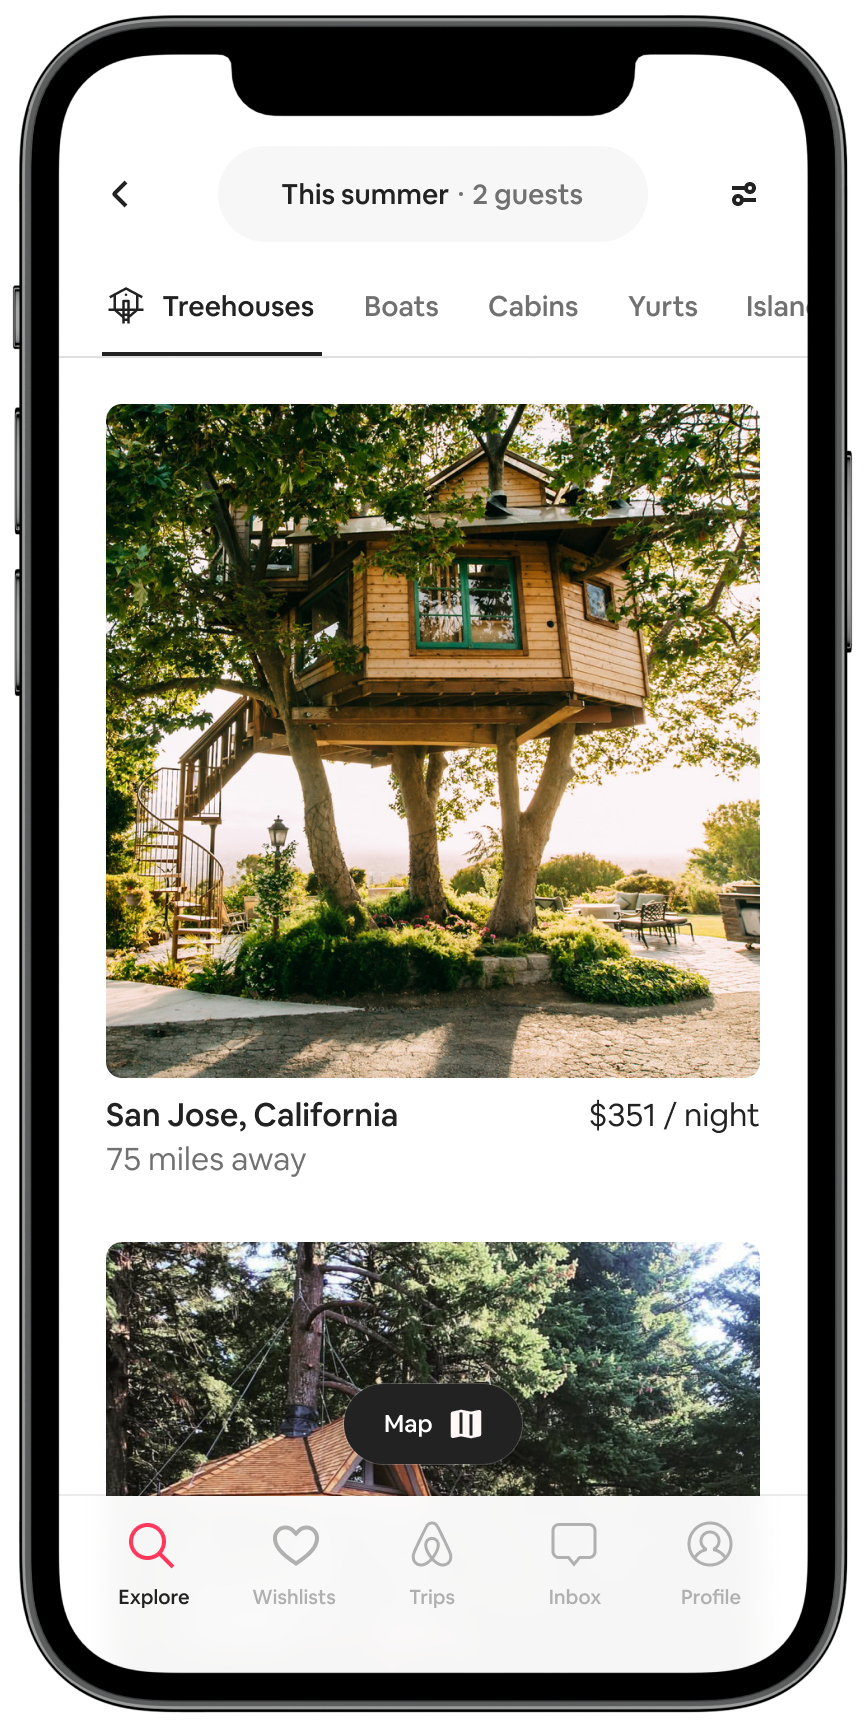 Treehouse listings are shown in a list on the flexible destinations mobile screenshot of the Airbnb app. 